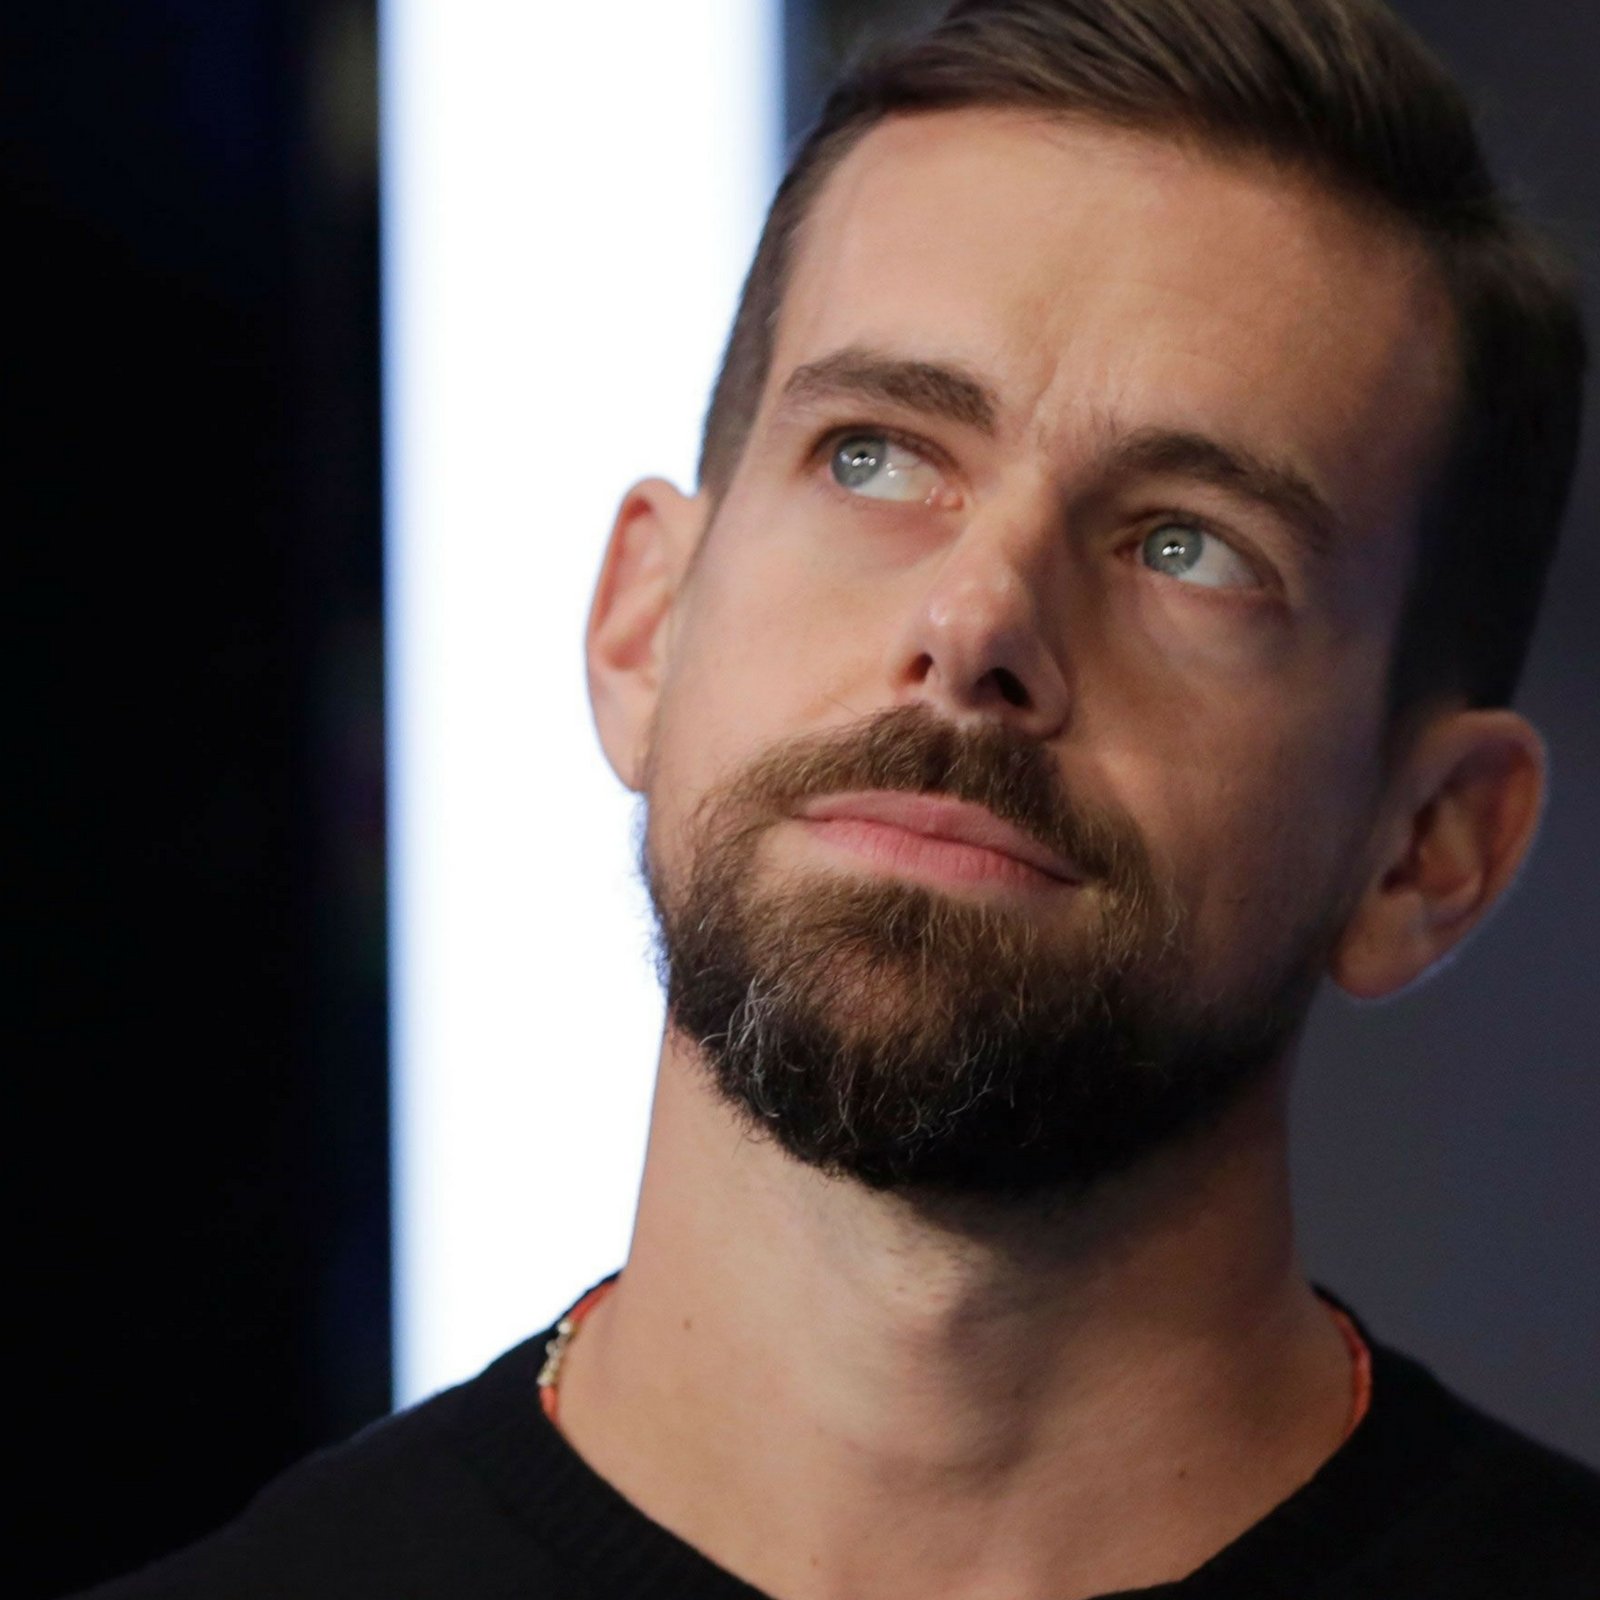 Twitter and Square CEO: Bitcoin to be World’s Currency